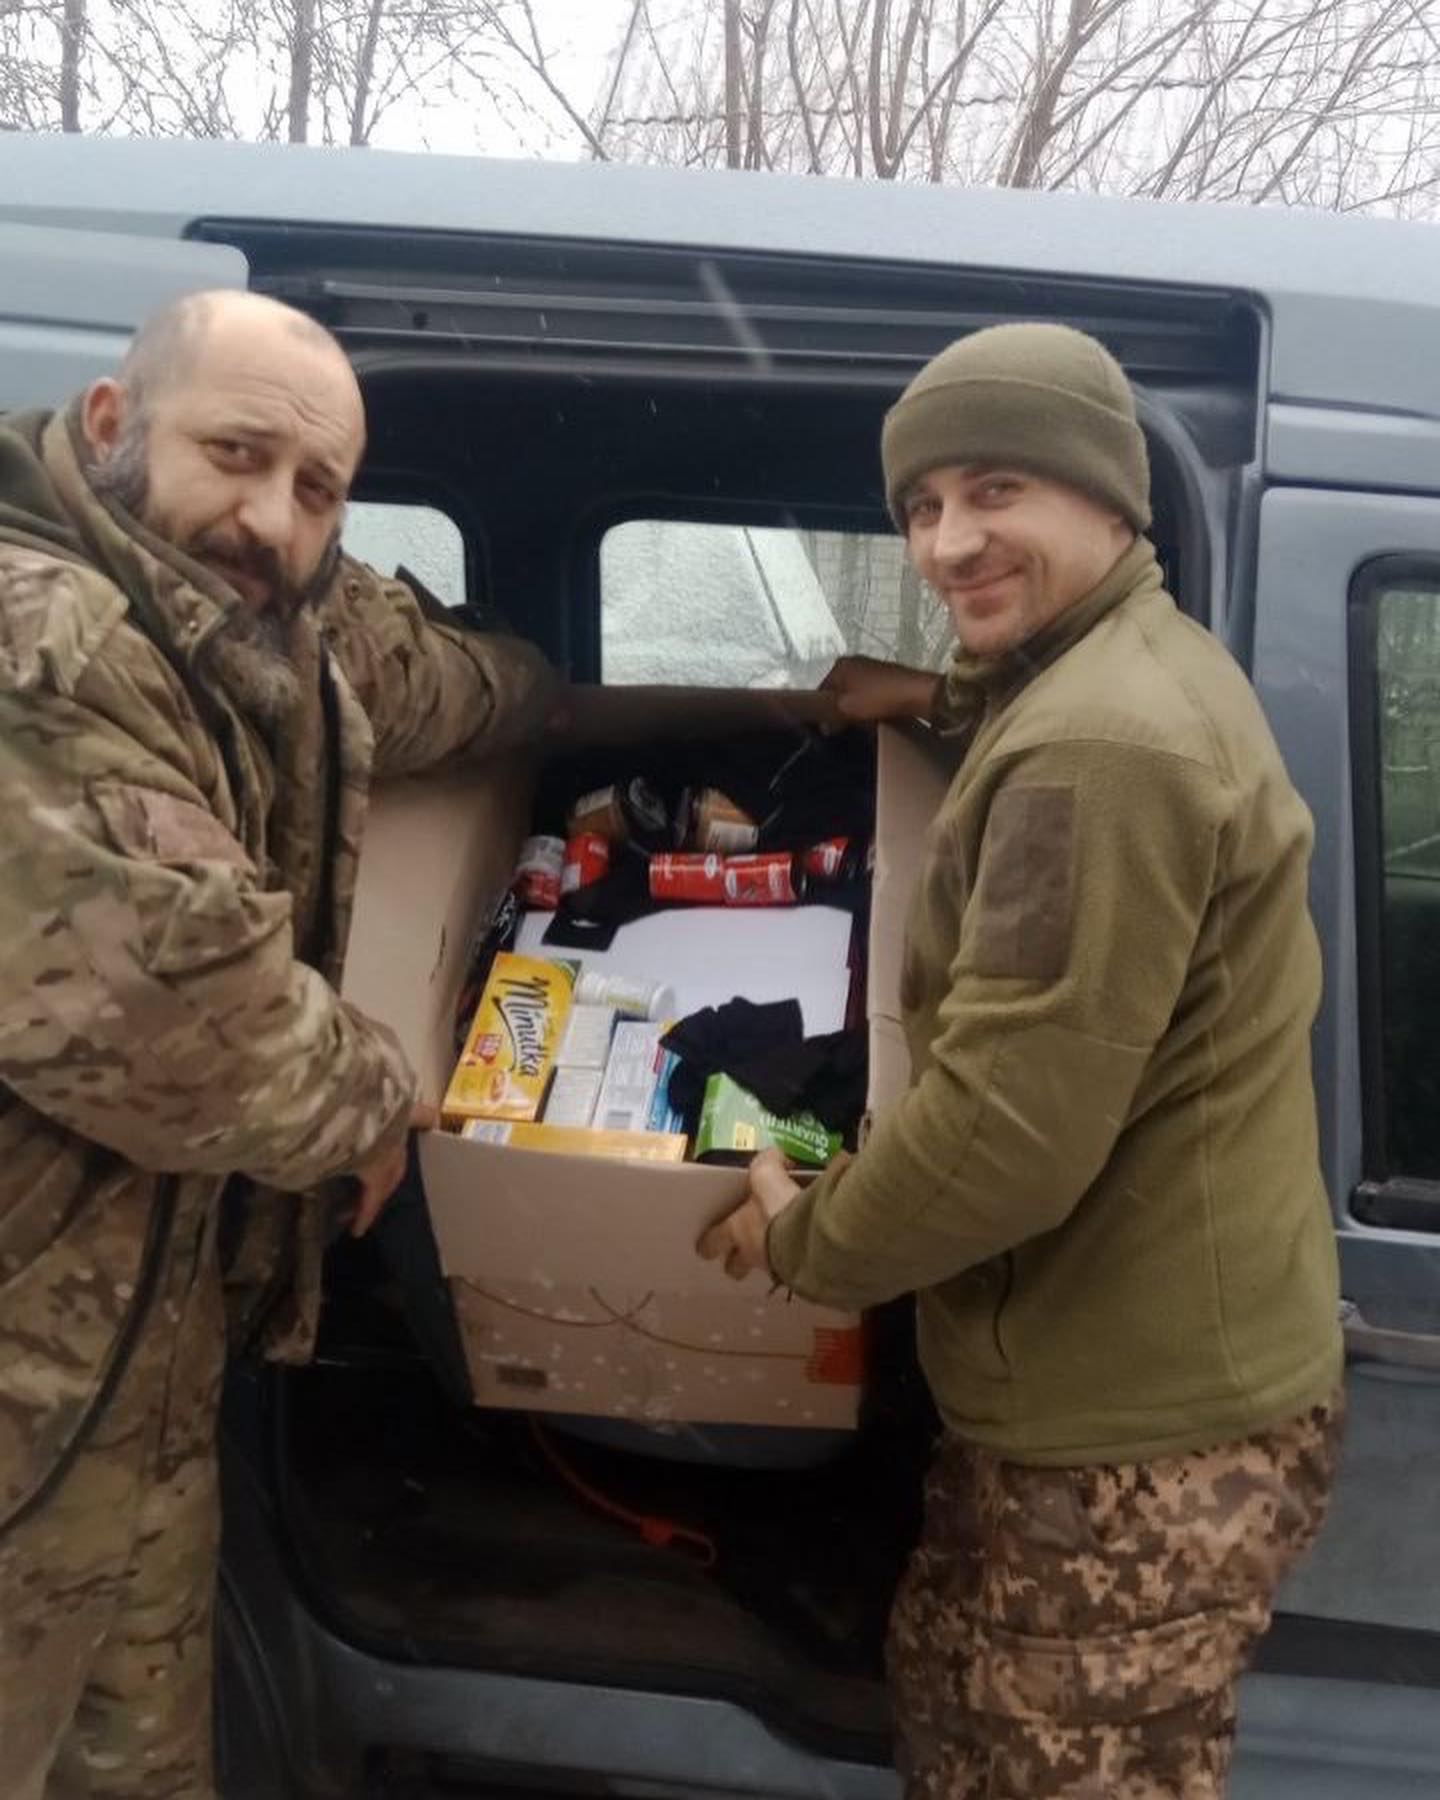 Two men in camouflage standing next to a van full of food.